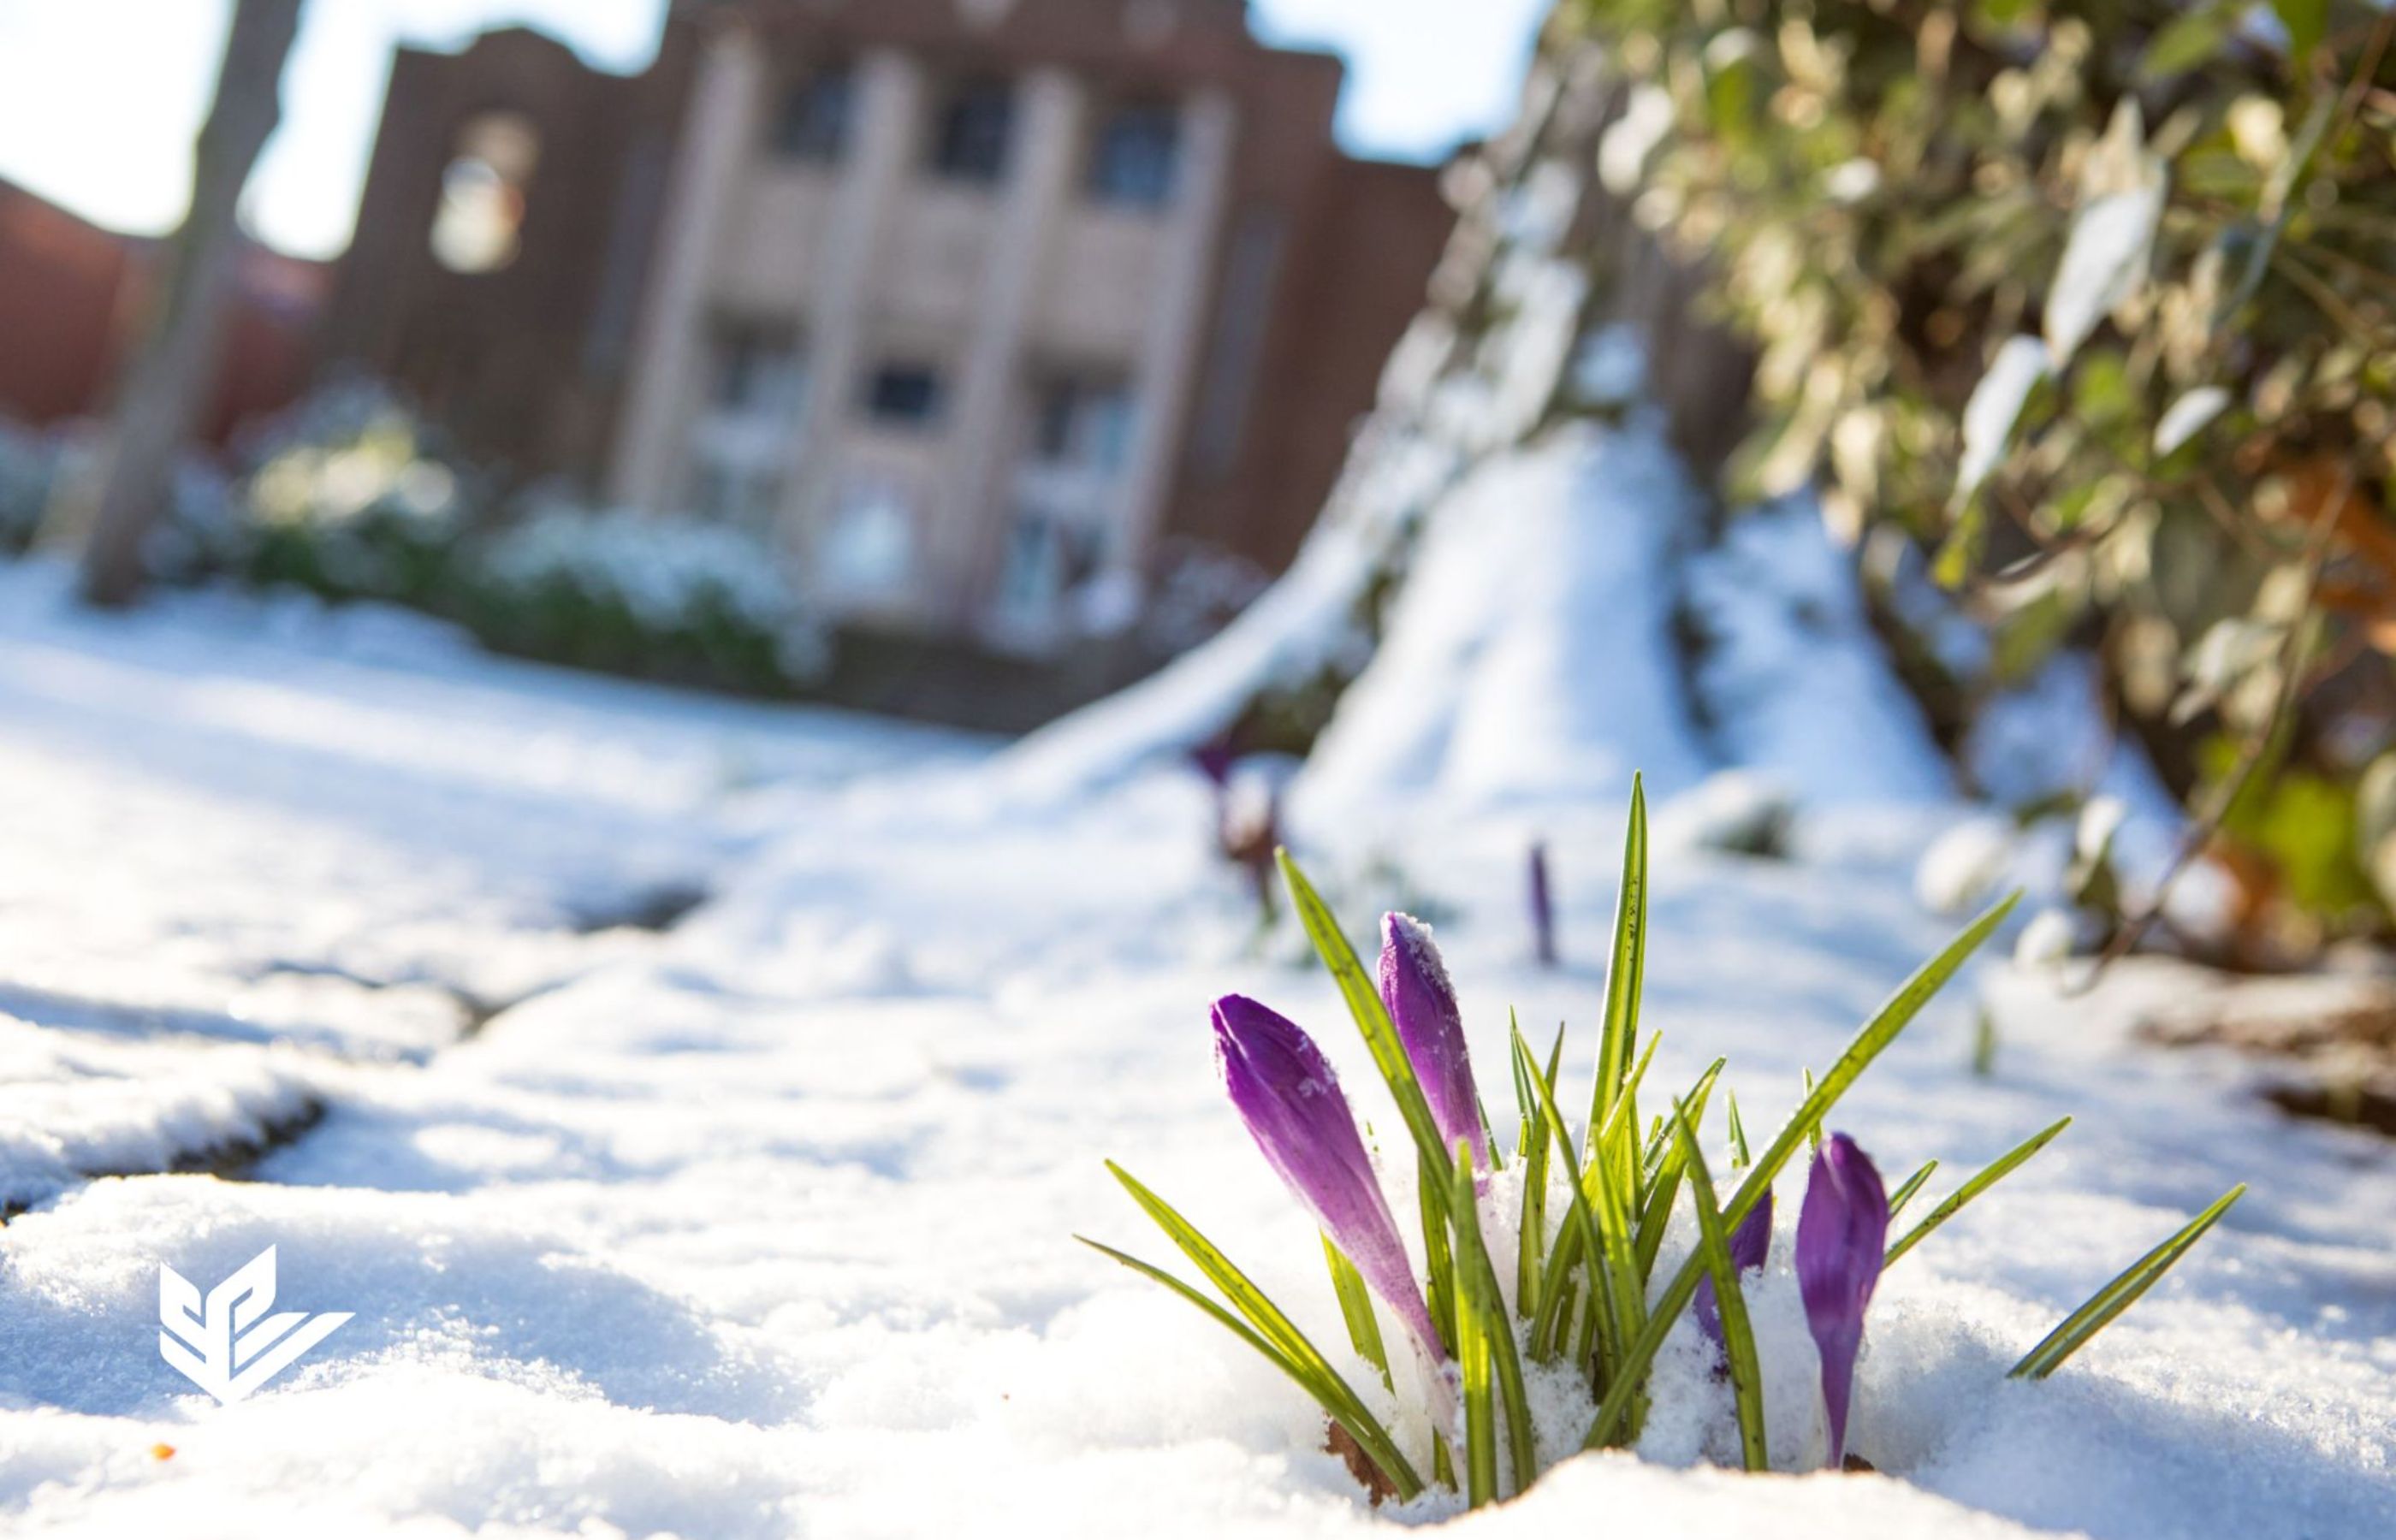 McKinley Hall, home to the E.E. Bach Theatre, sits in the white winter snow and purple flower shoots in the foreground